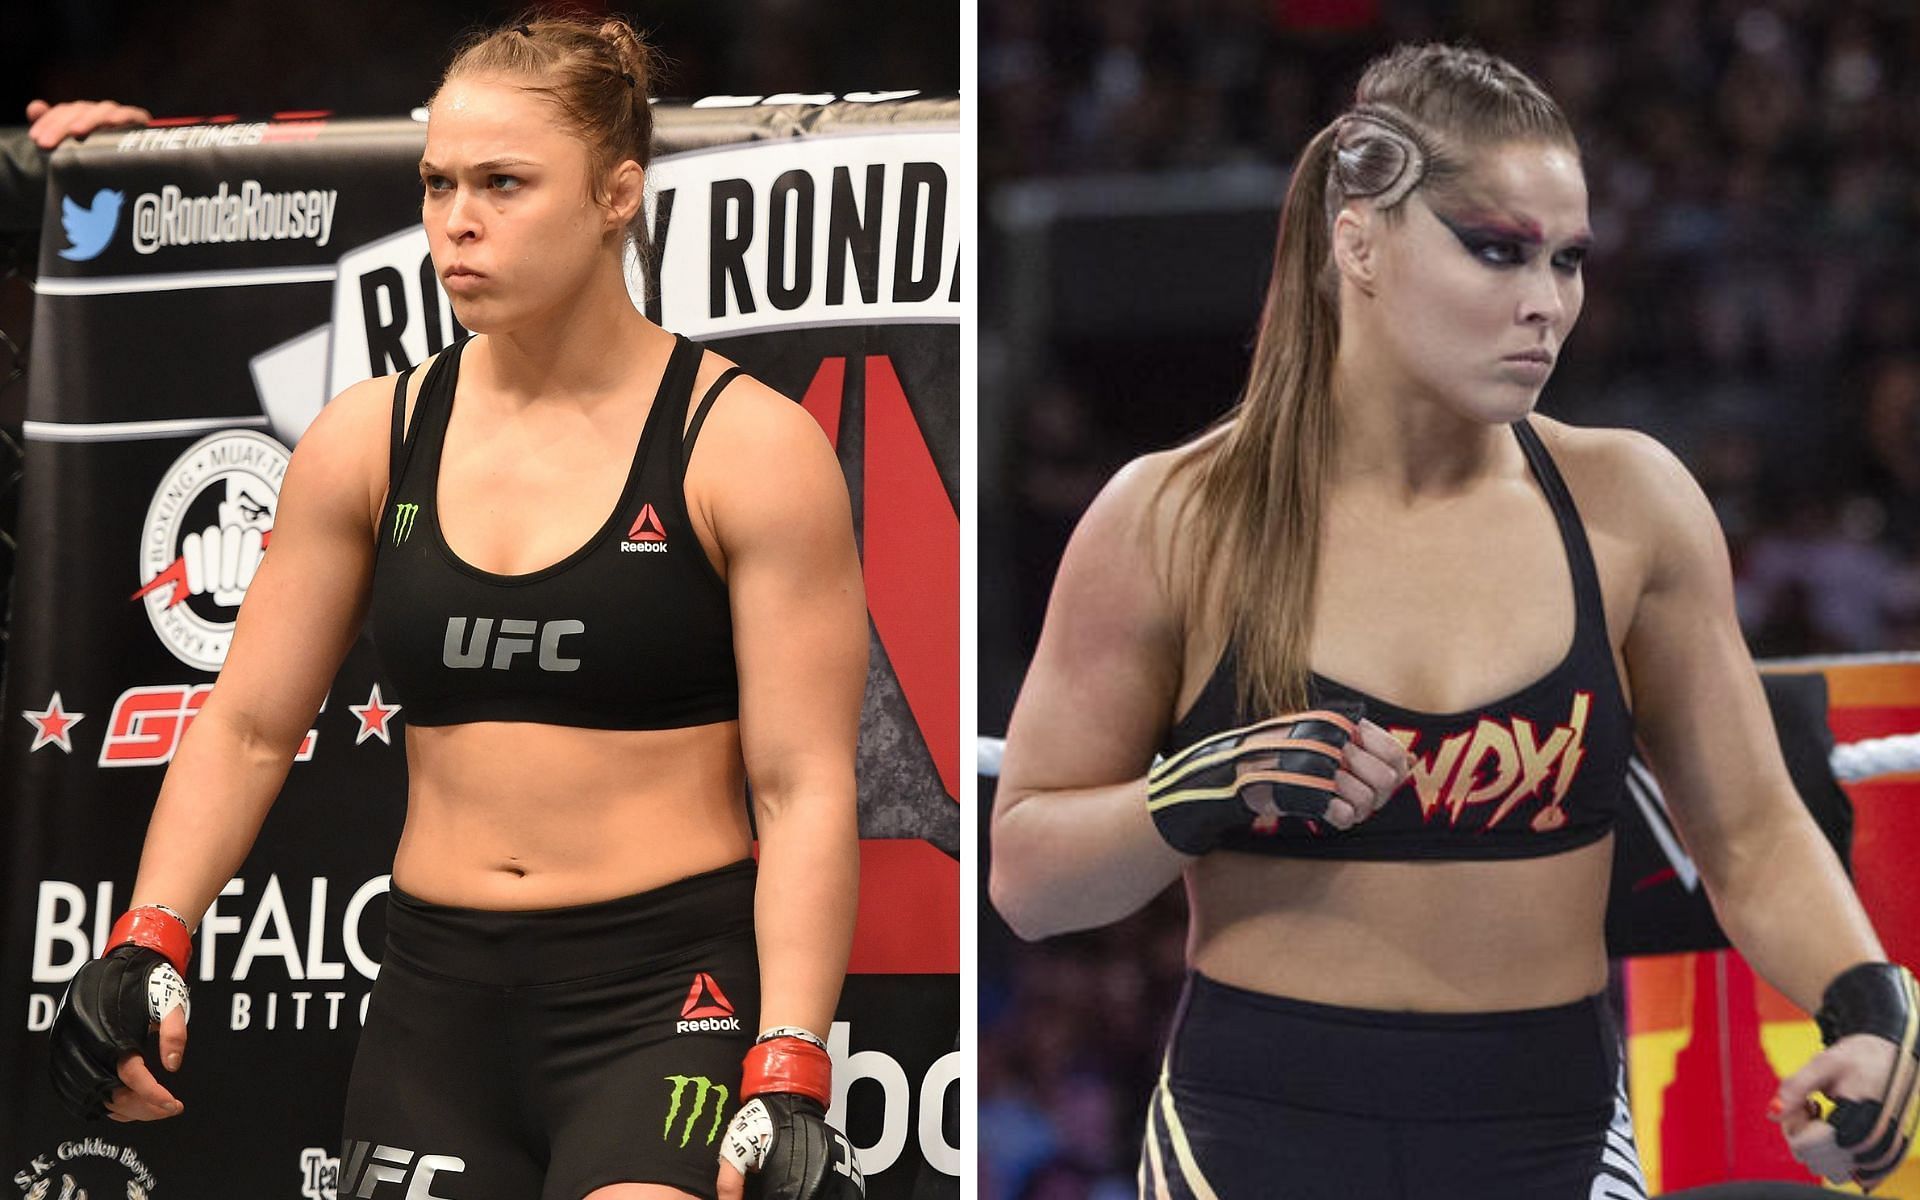 Ronda was champion in UFC and WWE!